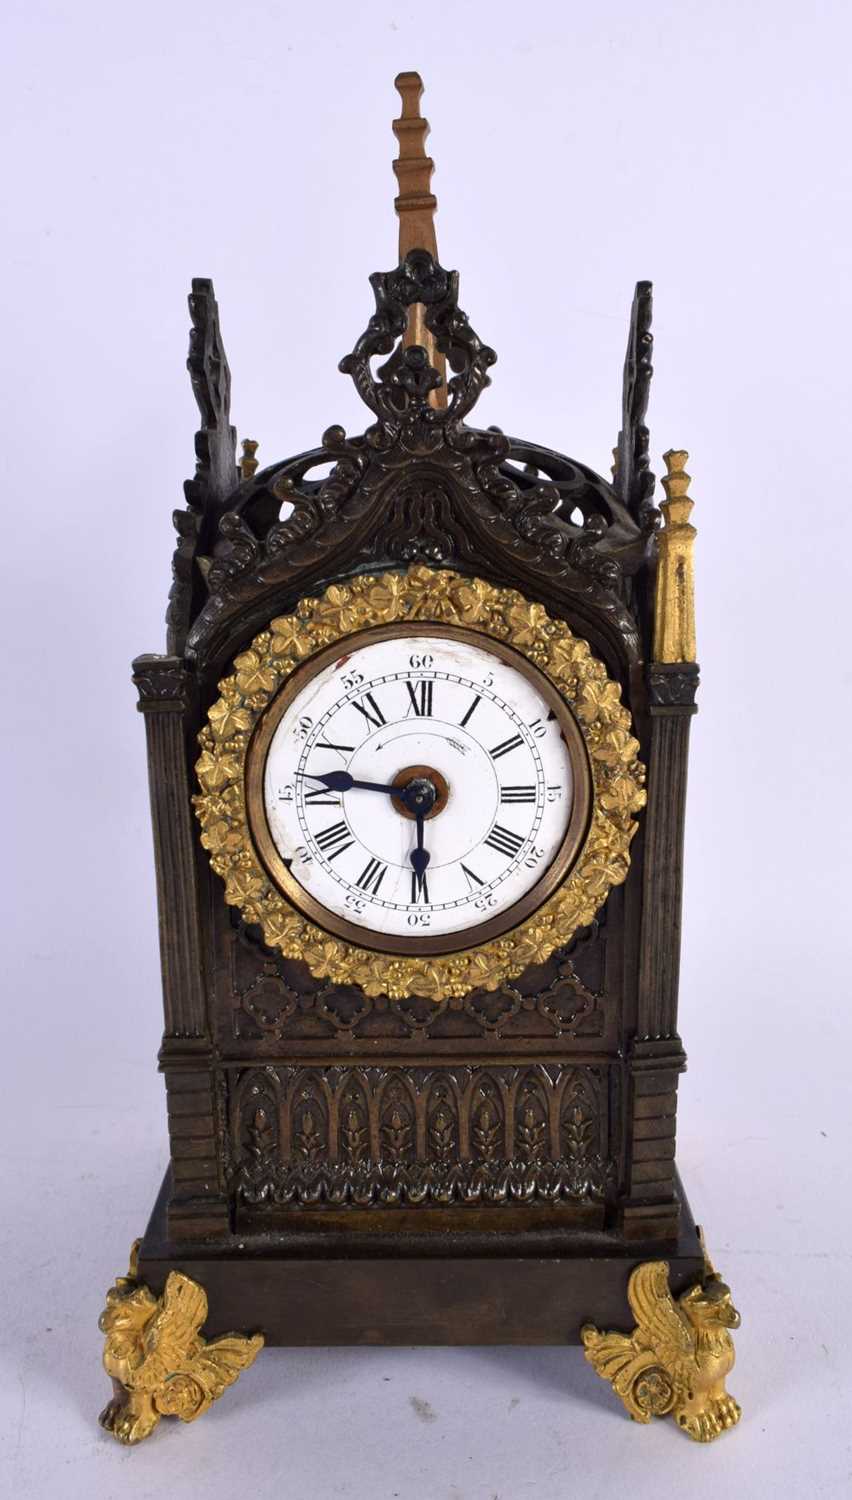 A LATE 19TH CENTURY FRENCH GOTHIC REVIVAL BRONZE LANTERN CLOCK of architectural form. 27 cm x 10